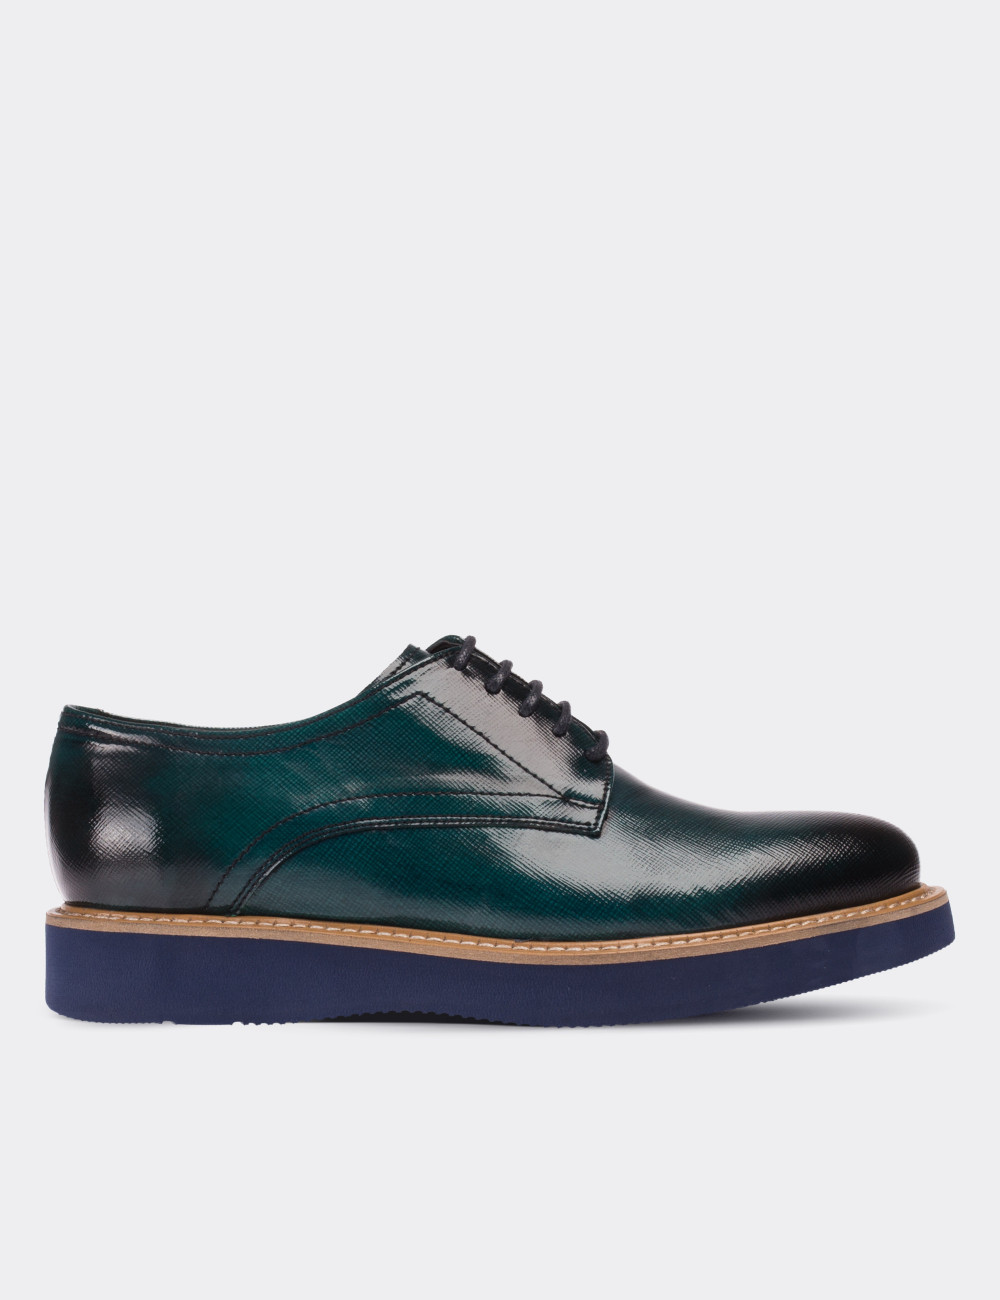 green patent leather